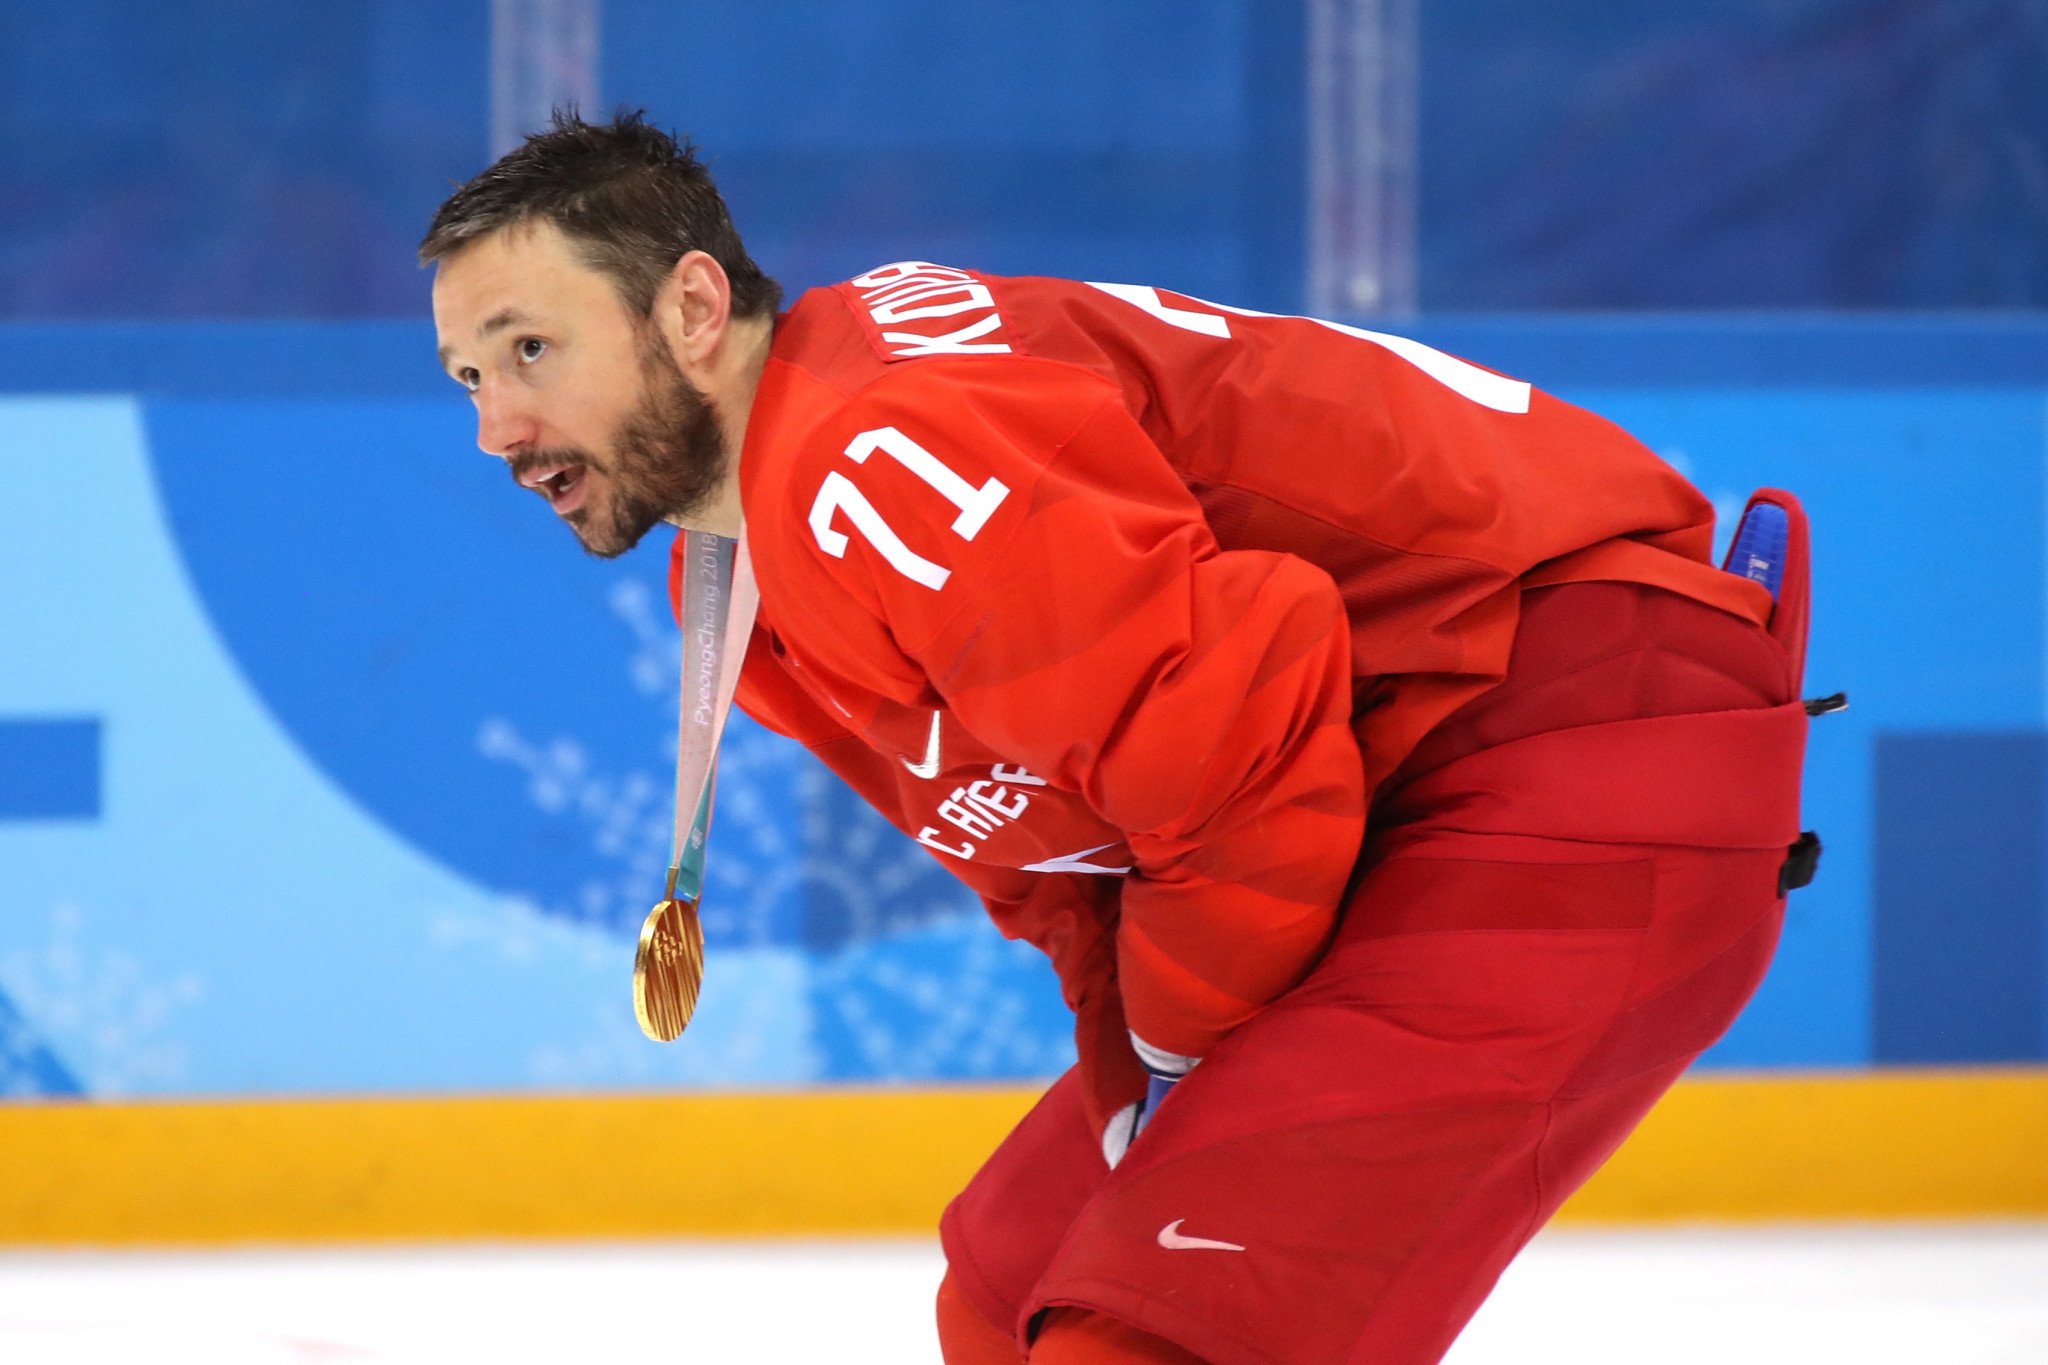 Ilya Kovalchuk has been named as the most valuable player in the men's Olympic ice hockey tournament ©Getty Images